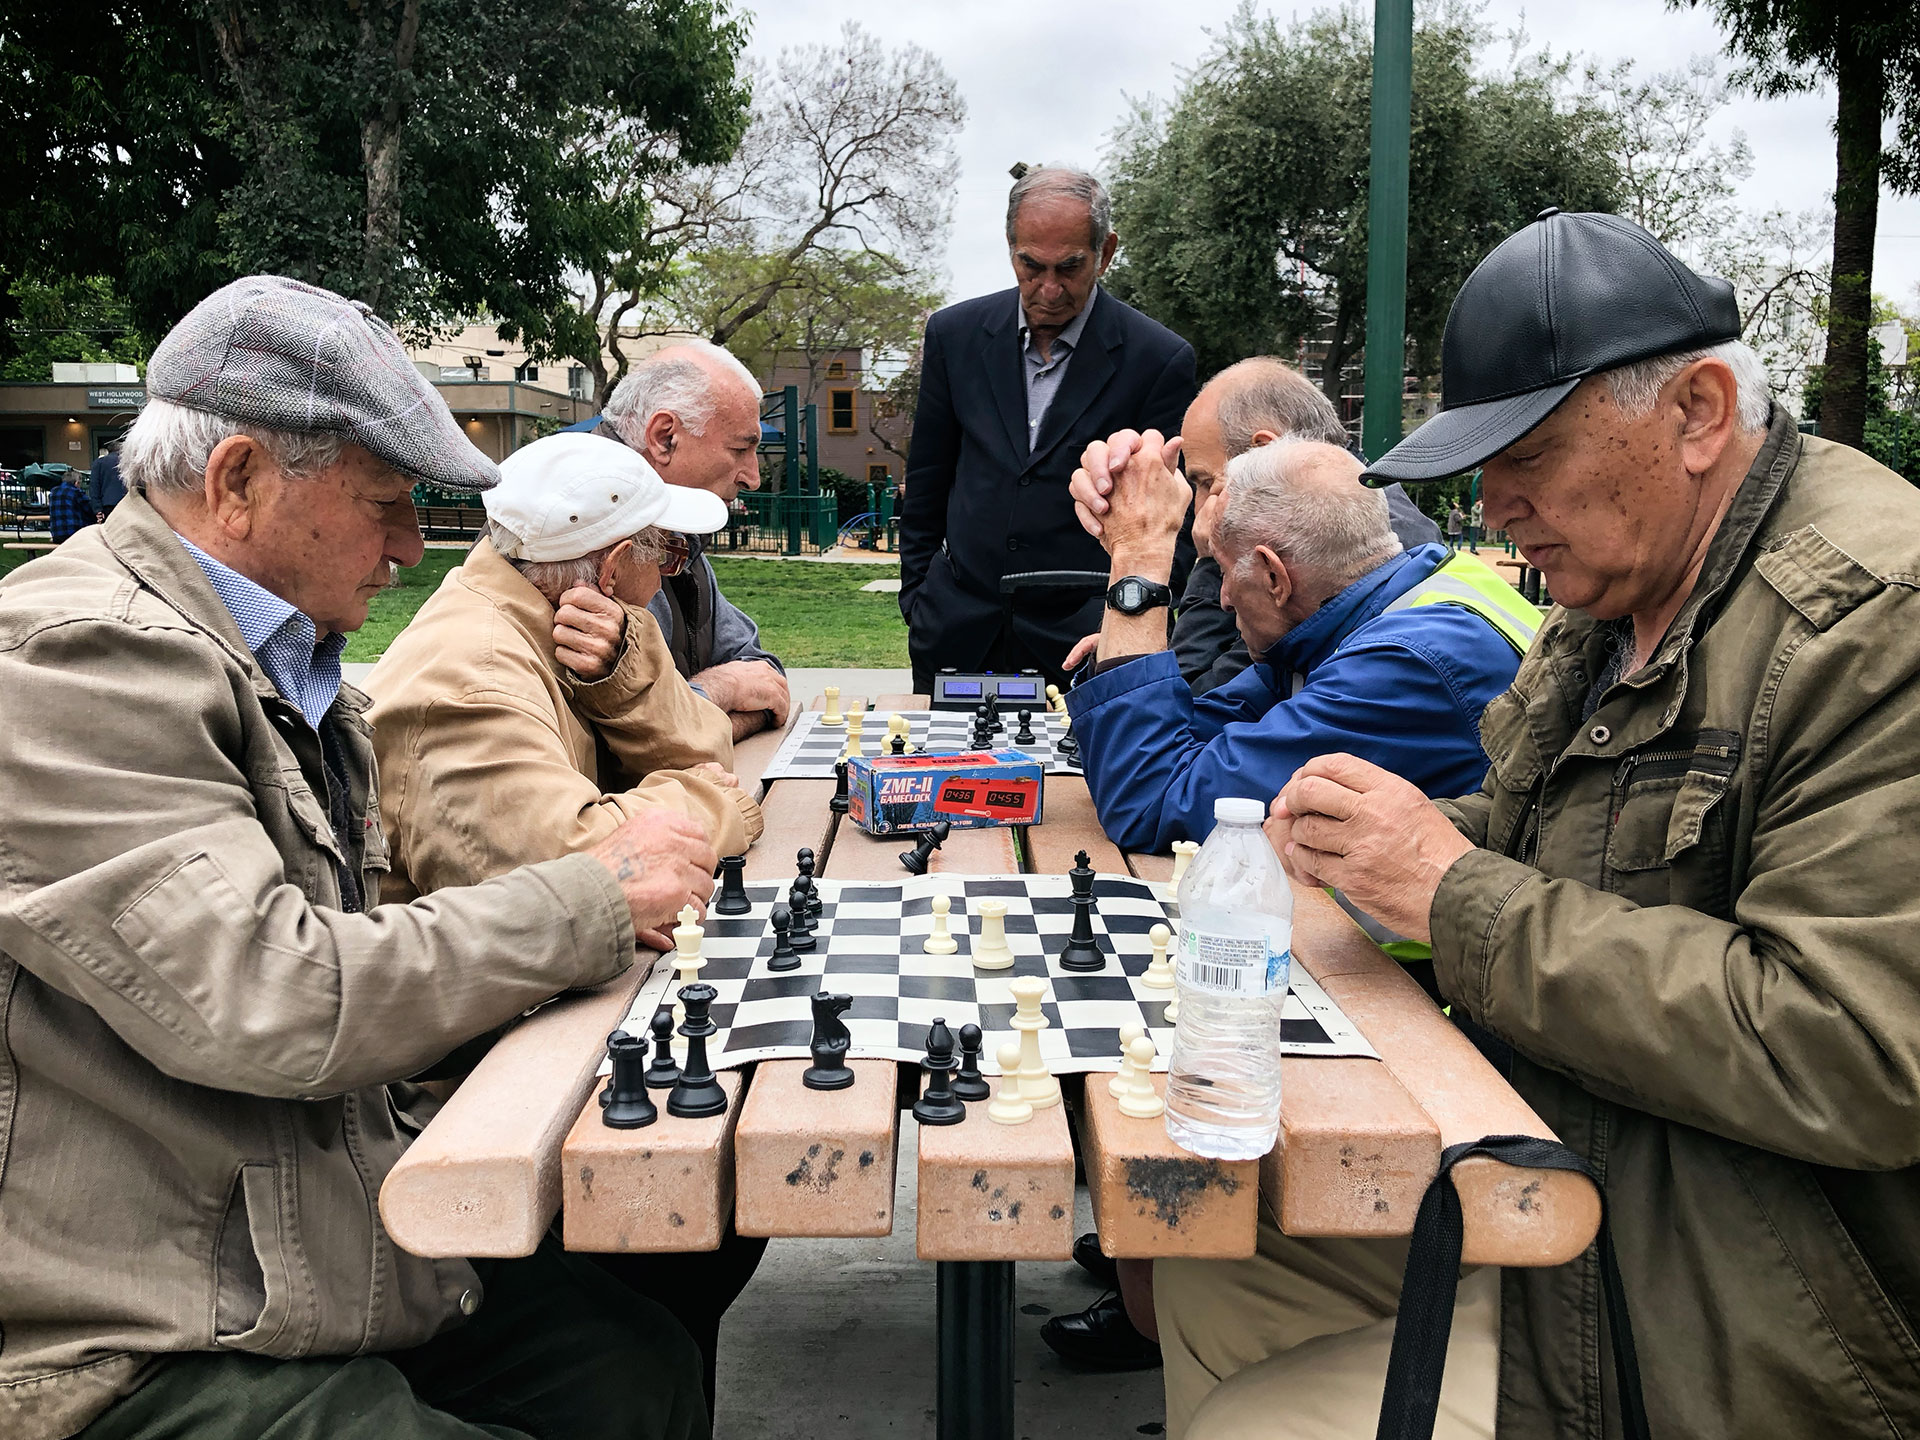 Russian Community Plummer Park in West Hollywood Playing Chess